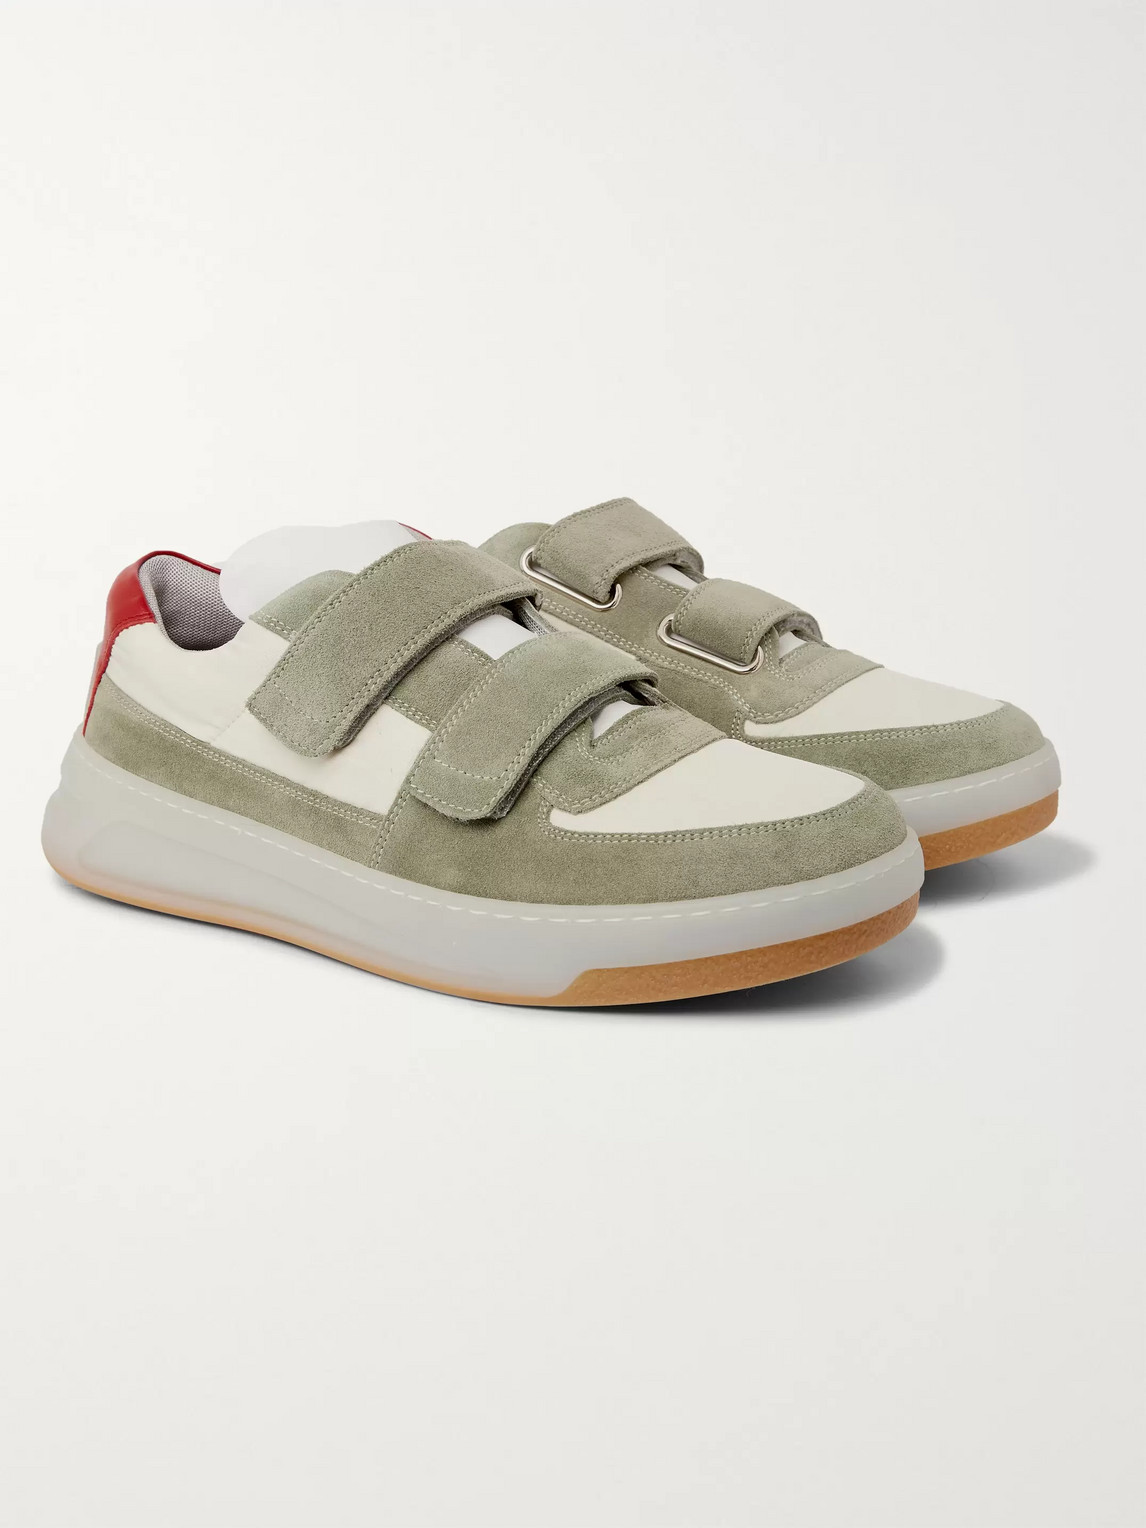 ACNE STUDIOS LEATHER-TRIMMED SUEDE AND SHELL SNEAKERS